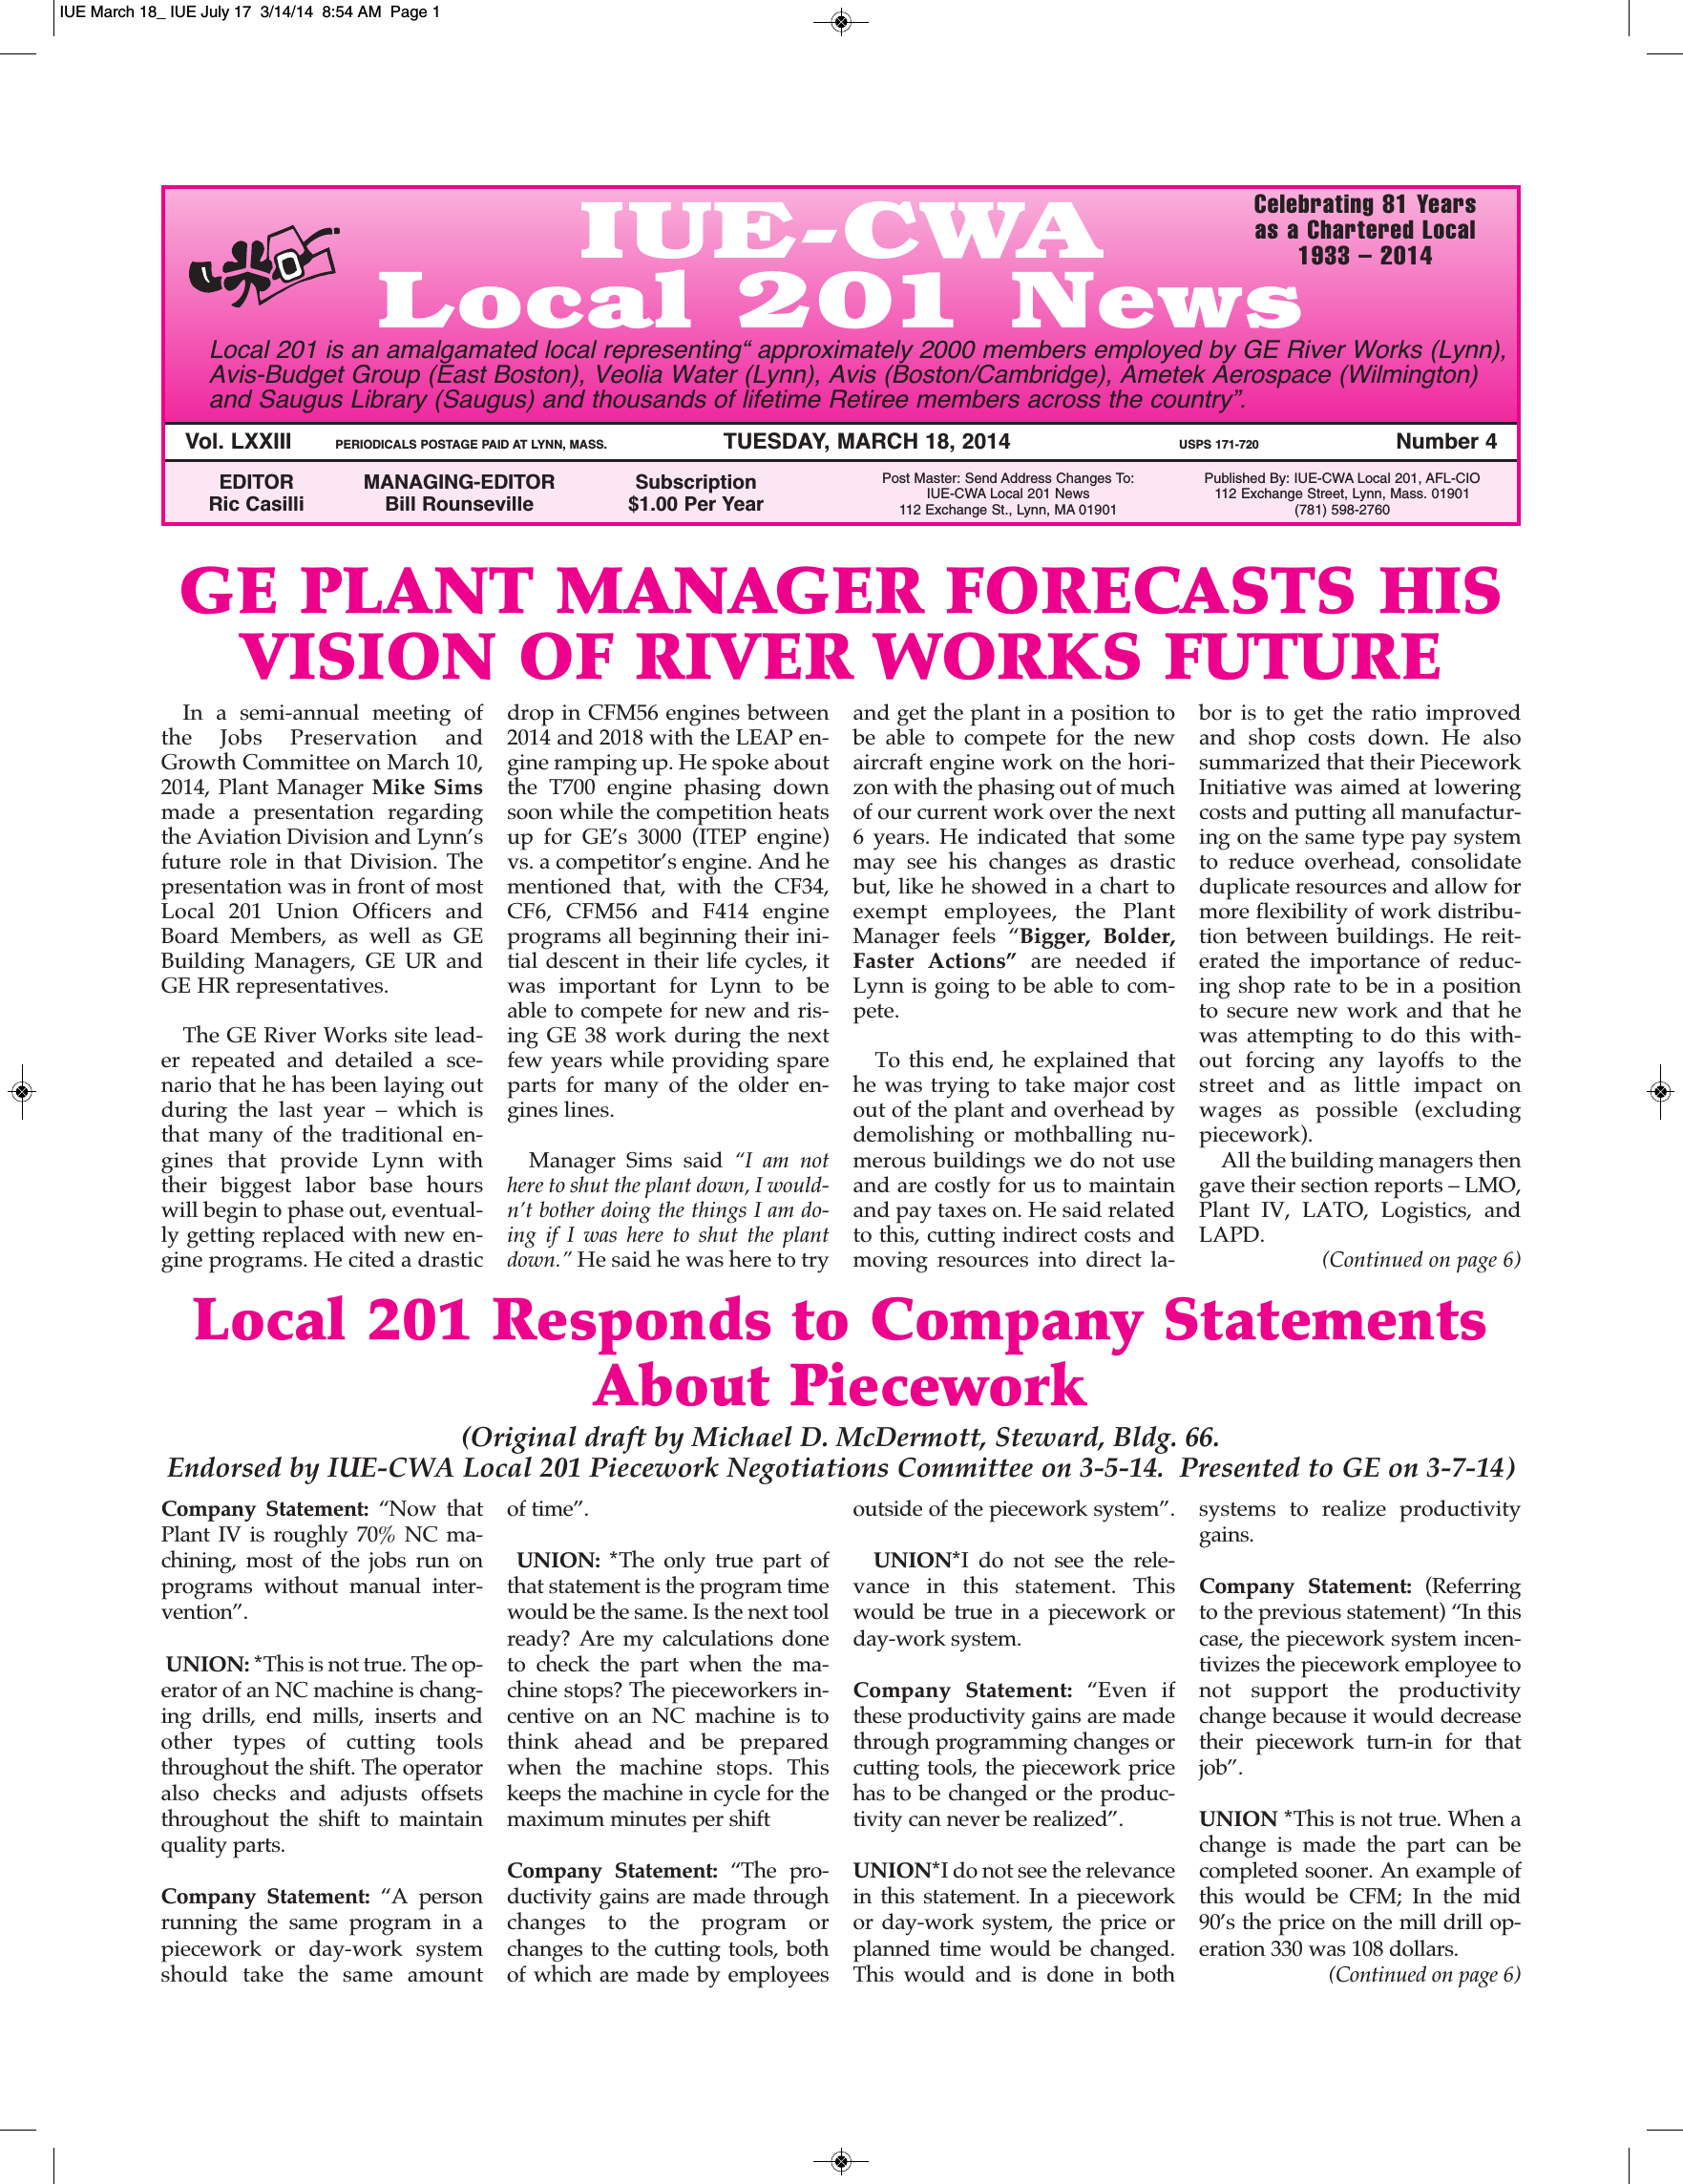 Page 1 of 12 - Hp IUE July 17 Preview ! March 18 0